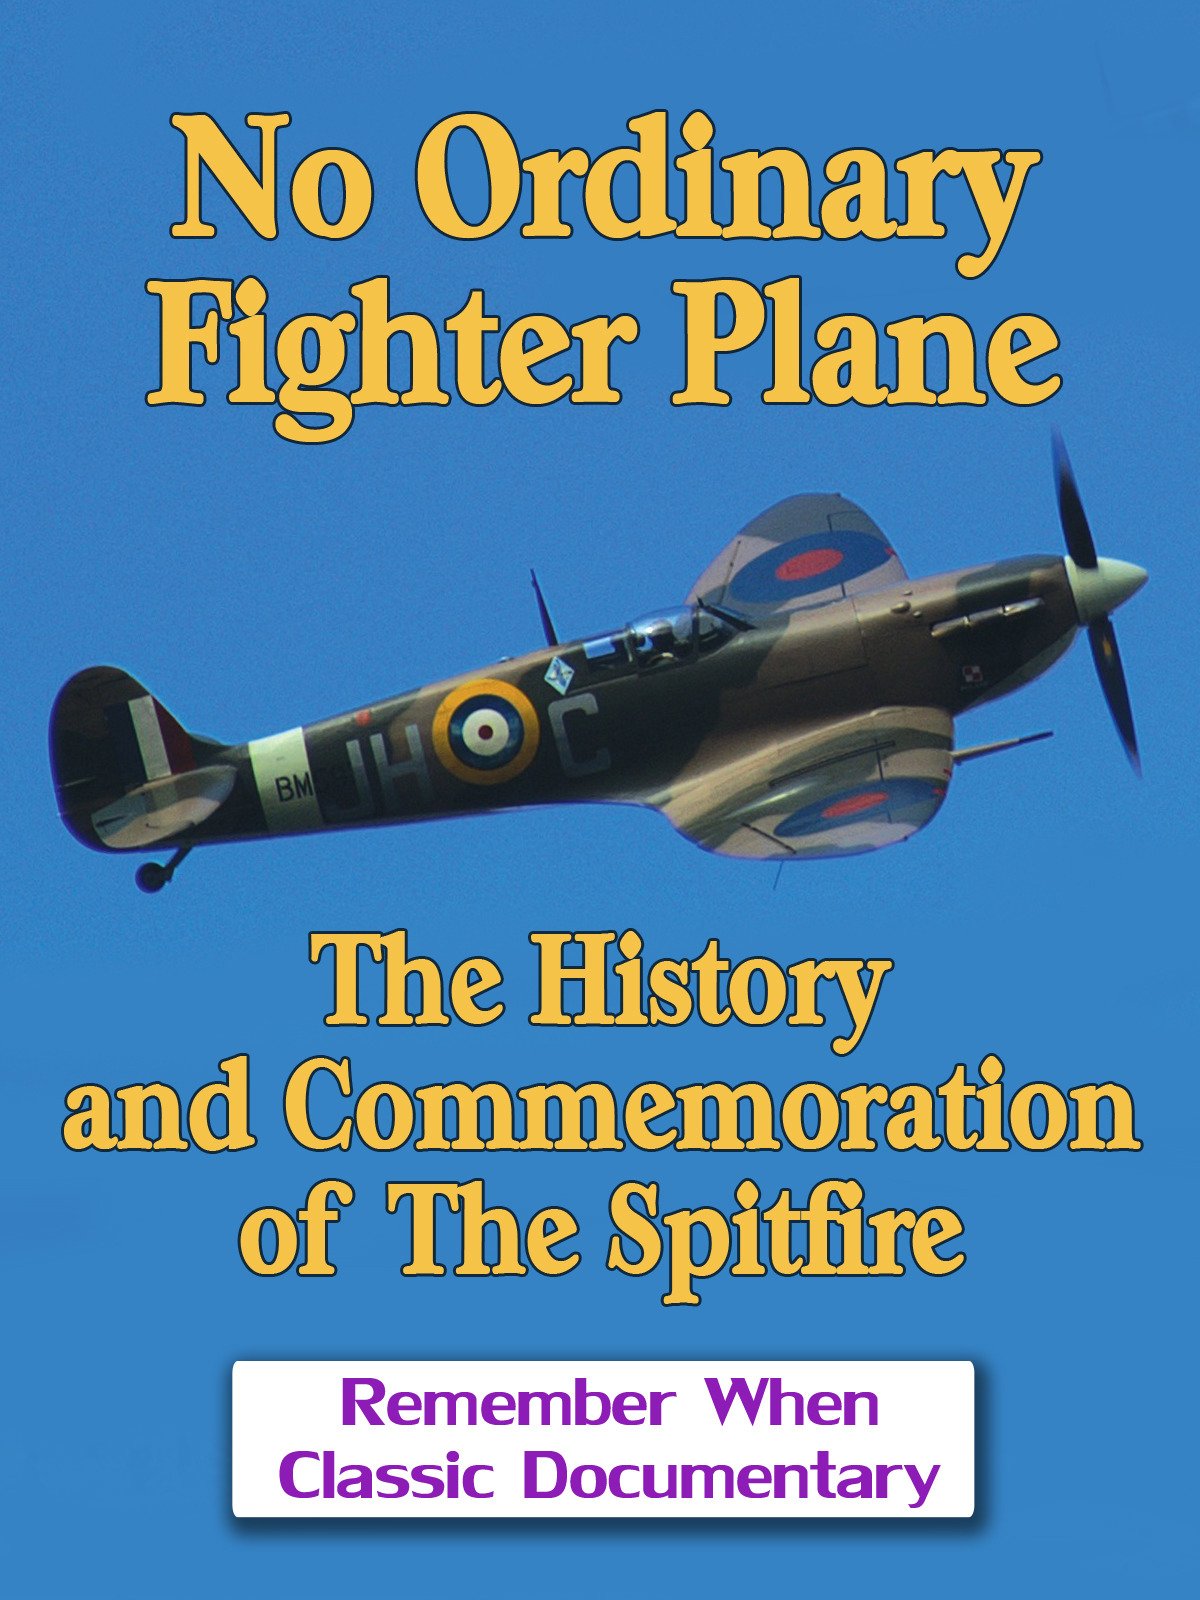 No Ordinary Fighter Plane - The History and Commemoration of The Spitfire